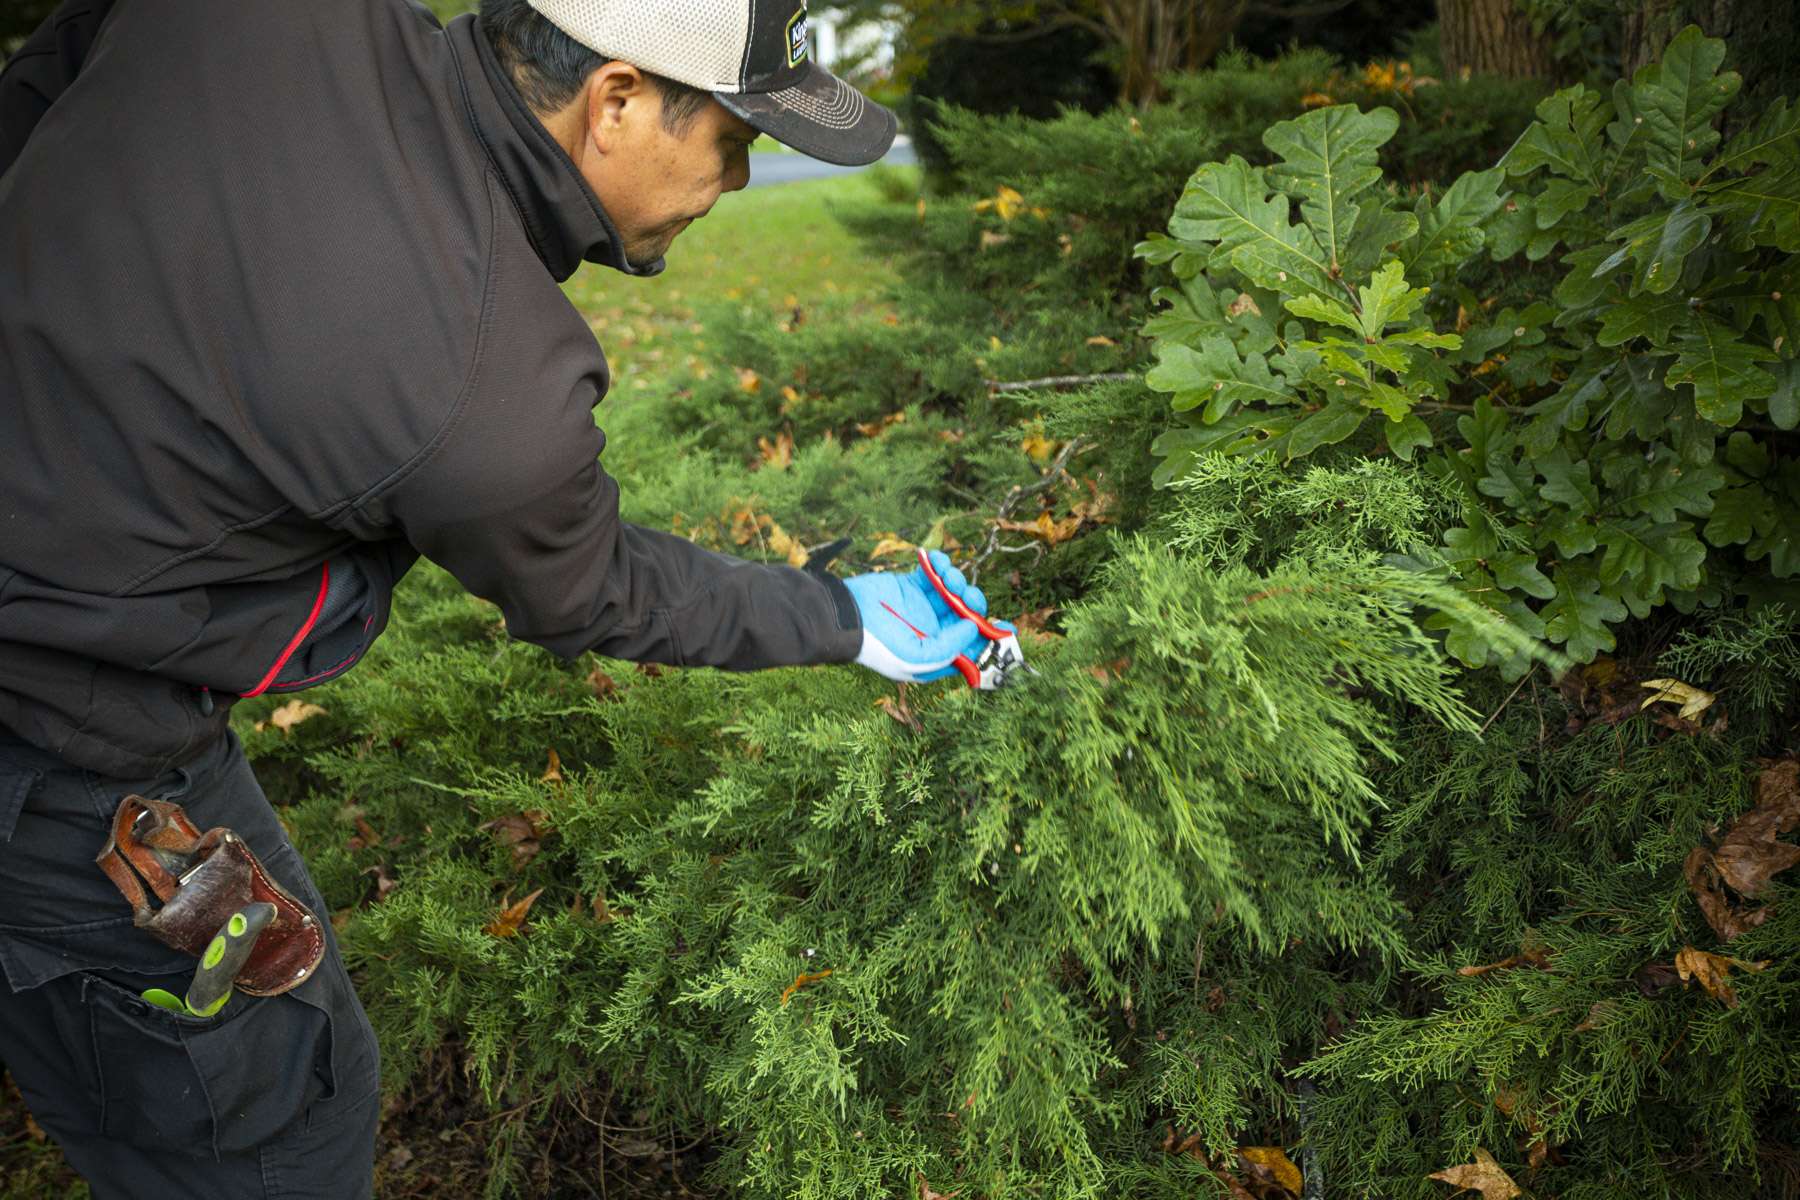 3 Common Shrub Pruning & Trimming Mistakes – Pruning Tips From Professionals